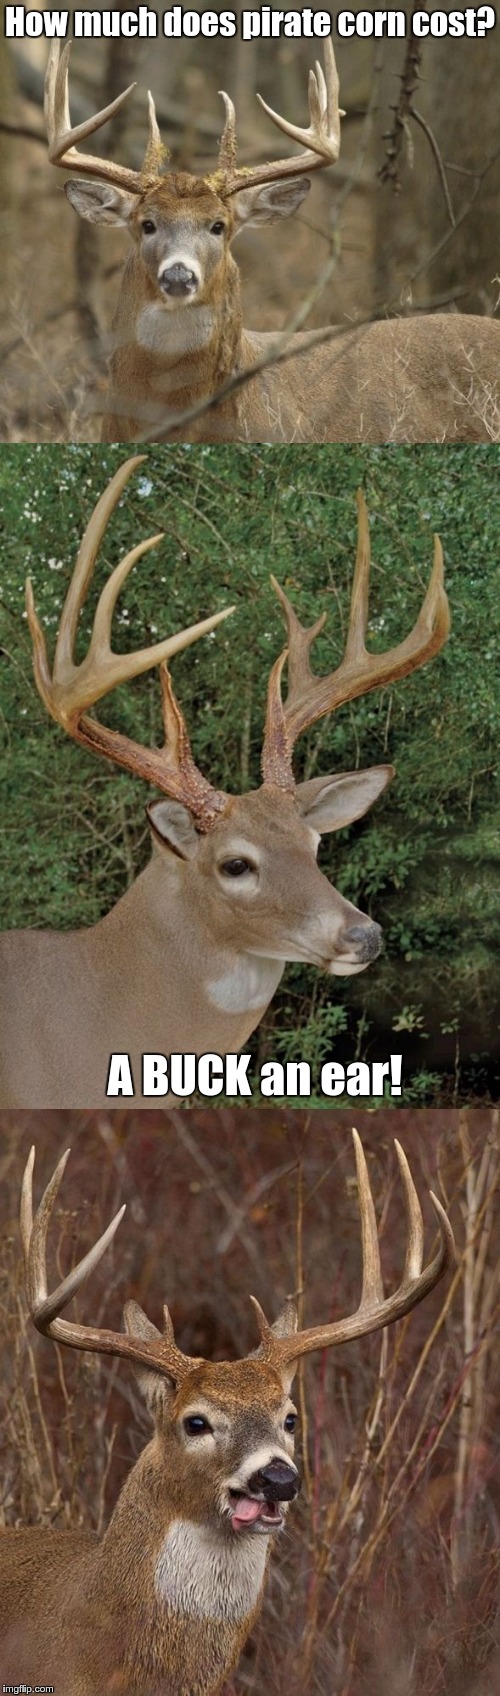 Bad Pun Buck | How much does pirate corn cost? A BUCK an ear! | image tagged in bad pun buck | made w/ Imgflip meme maker